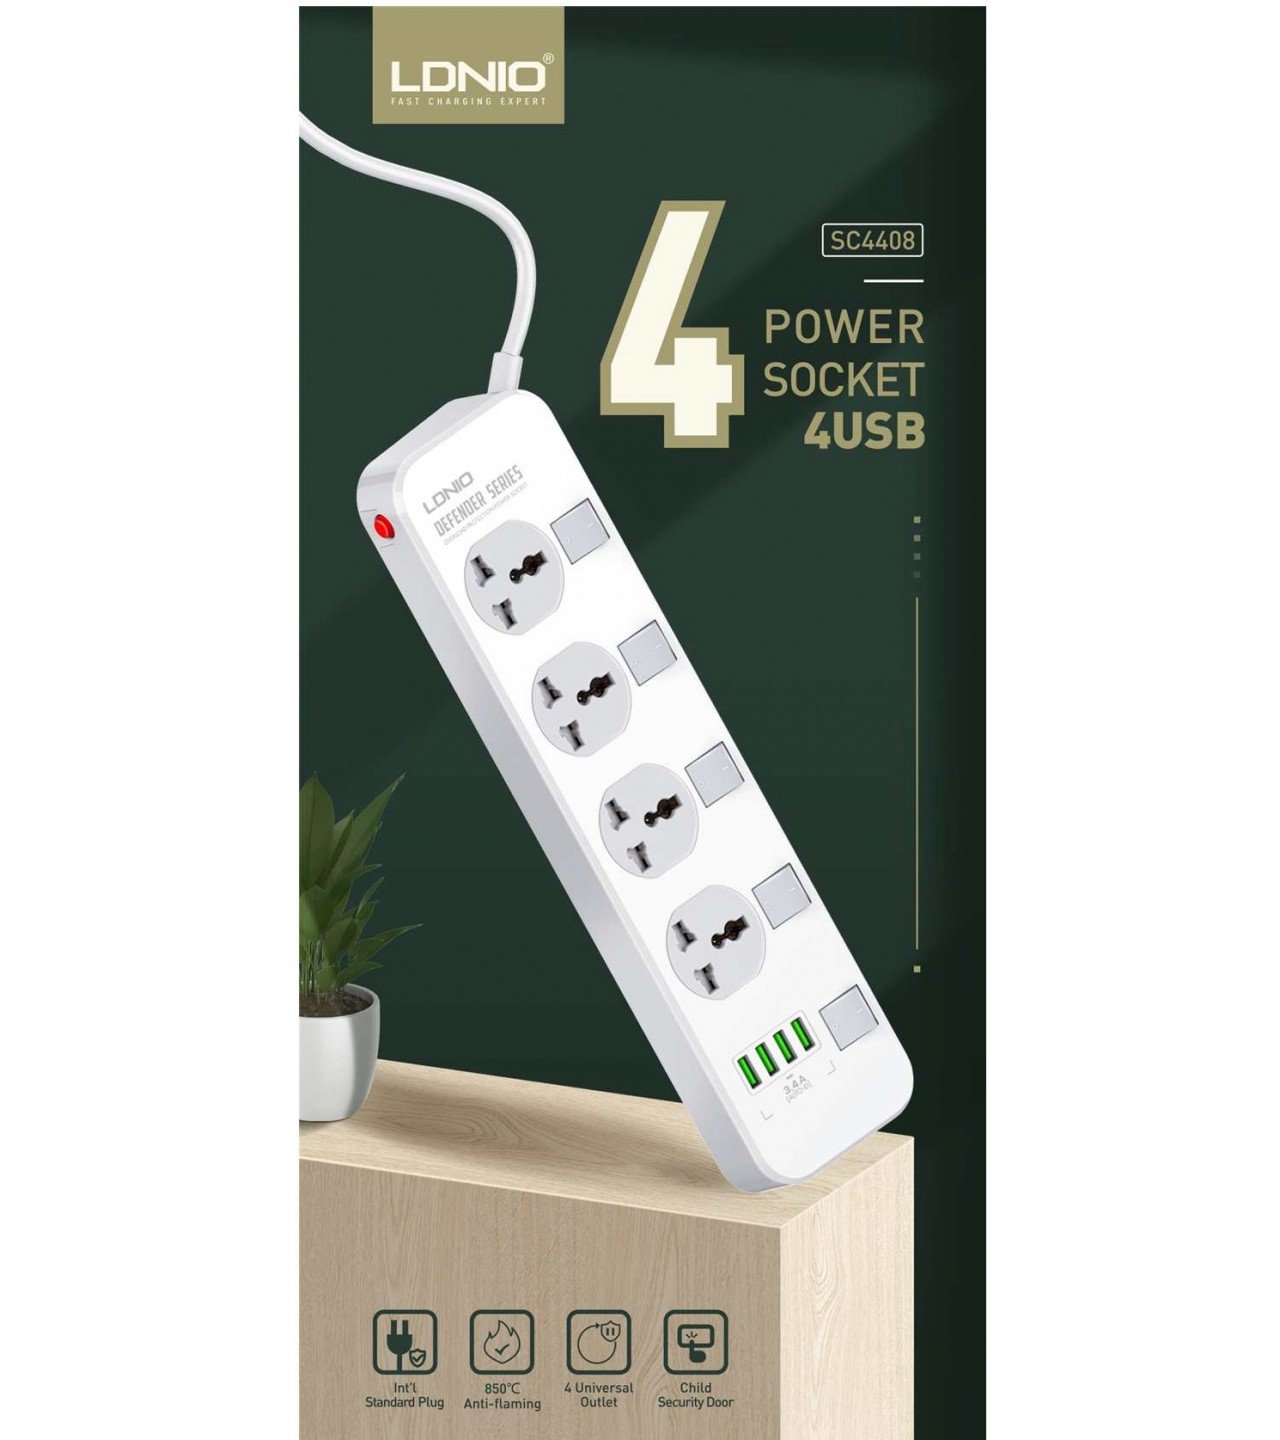 LDNIO SC4408 Electrical Socket Smart Extension Multifunction Power Supply Strip Charger Adapter